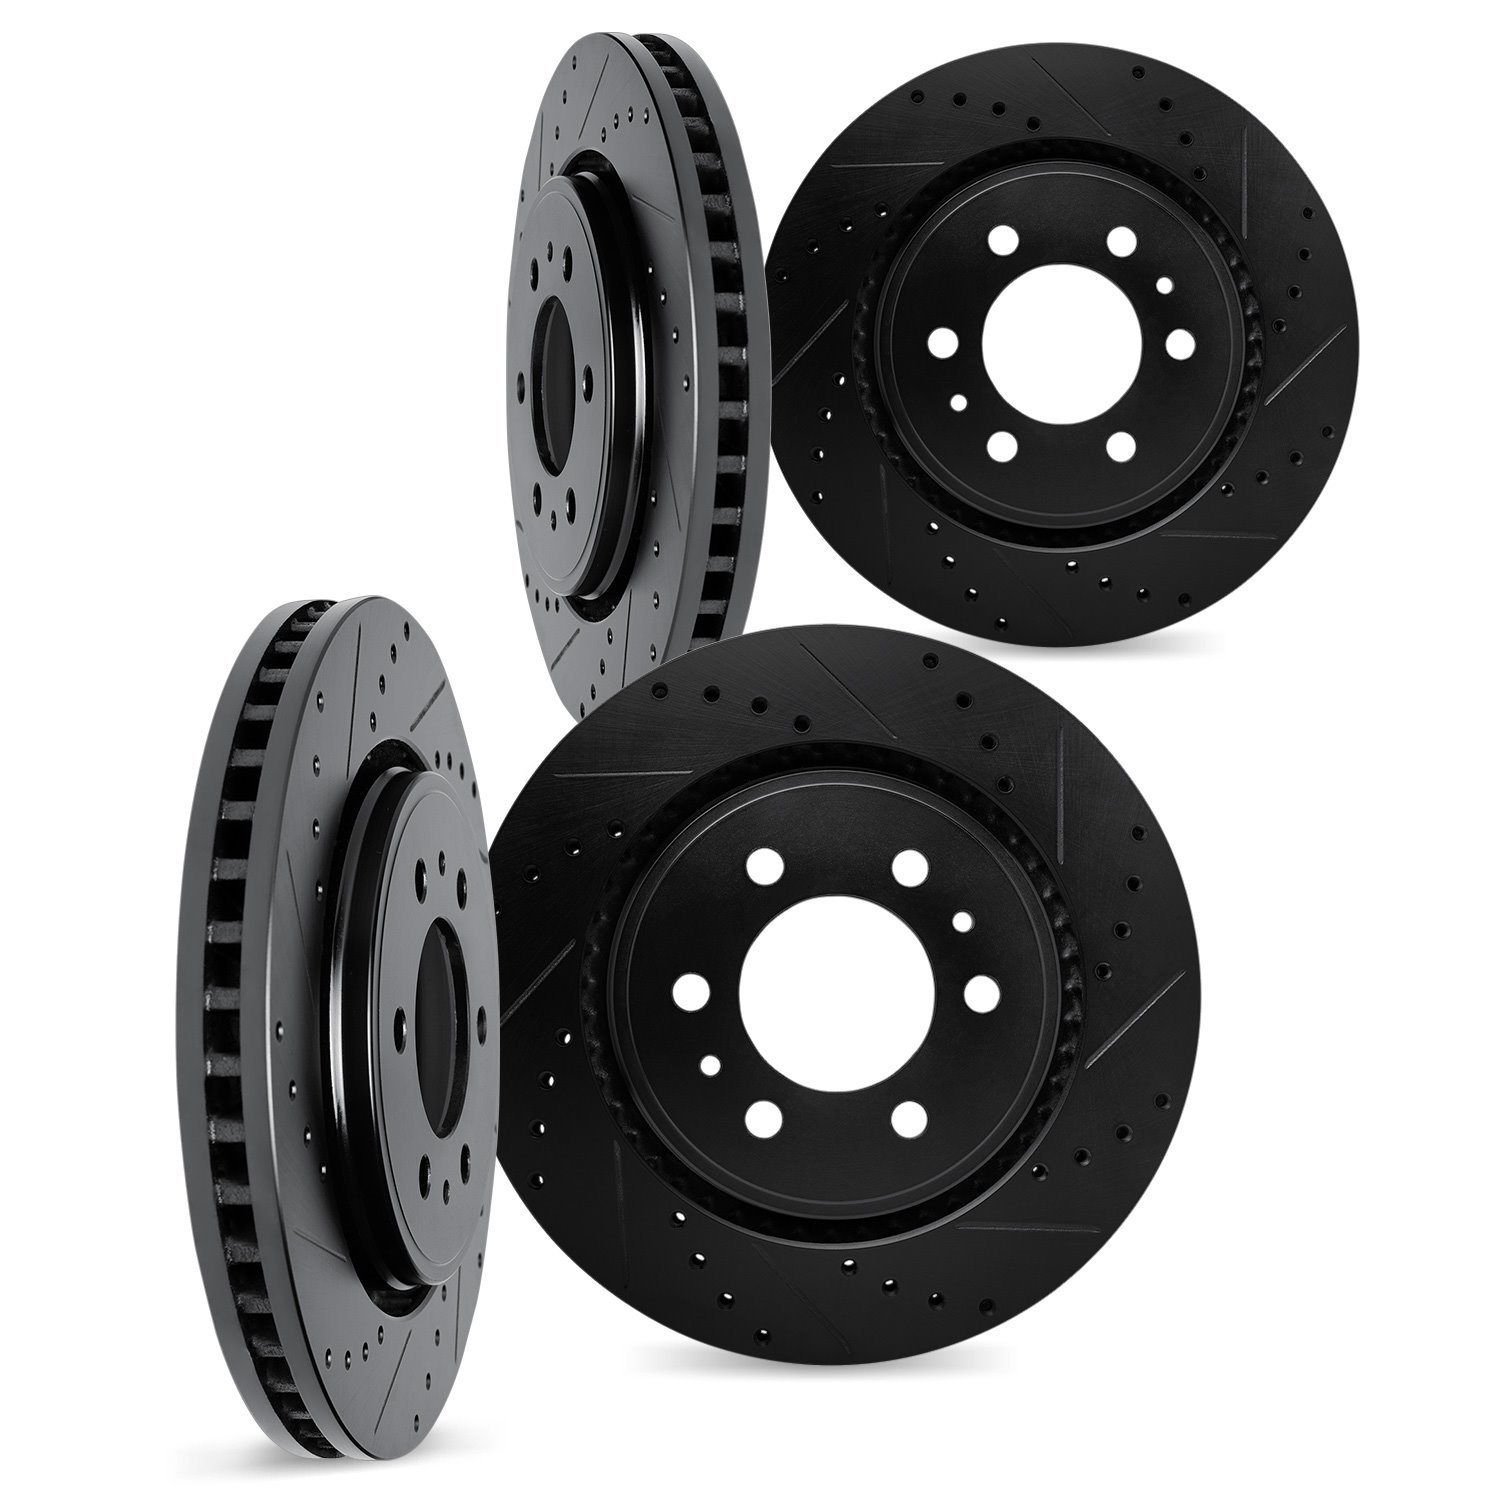 8004-54310 Drilled/Slotted Brake Rotors [Black], Fits Select Ford/Lincoln/Mercury/Mazda, Position: Front and Rear